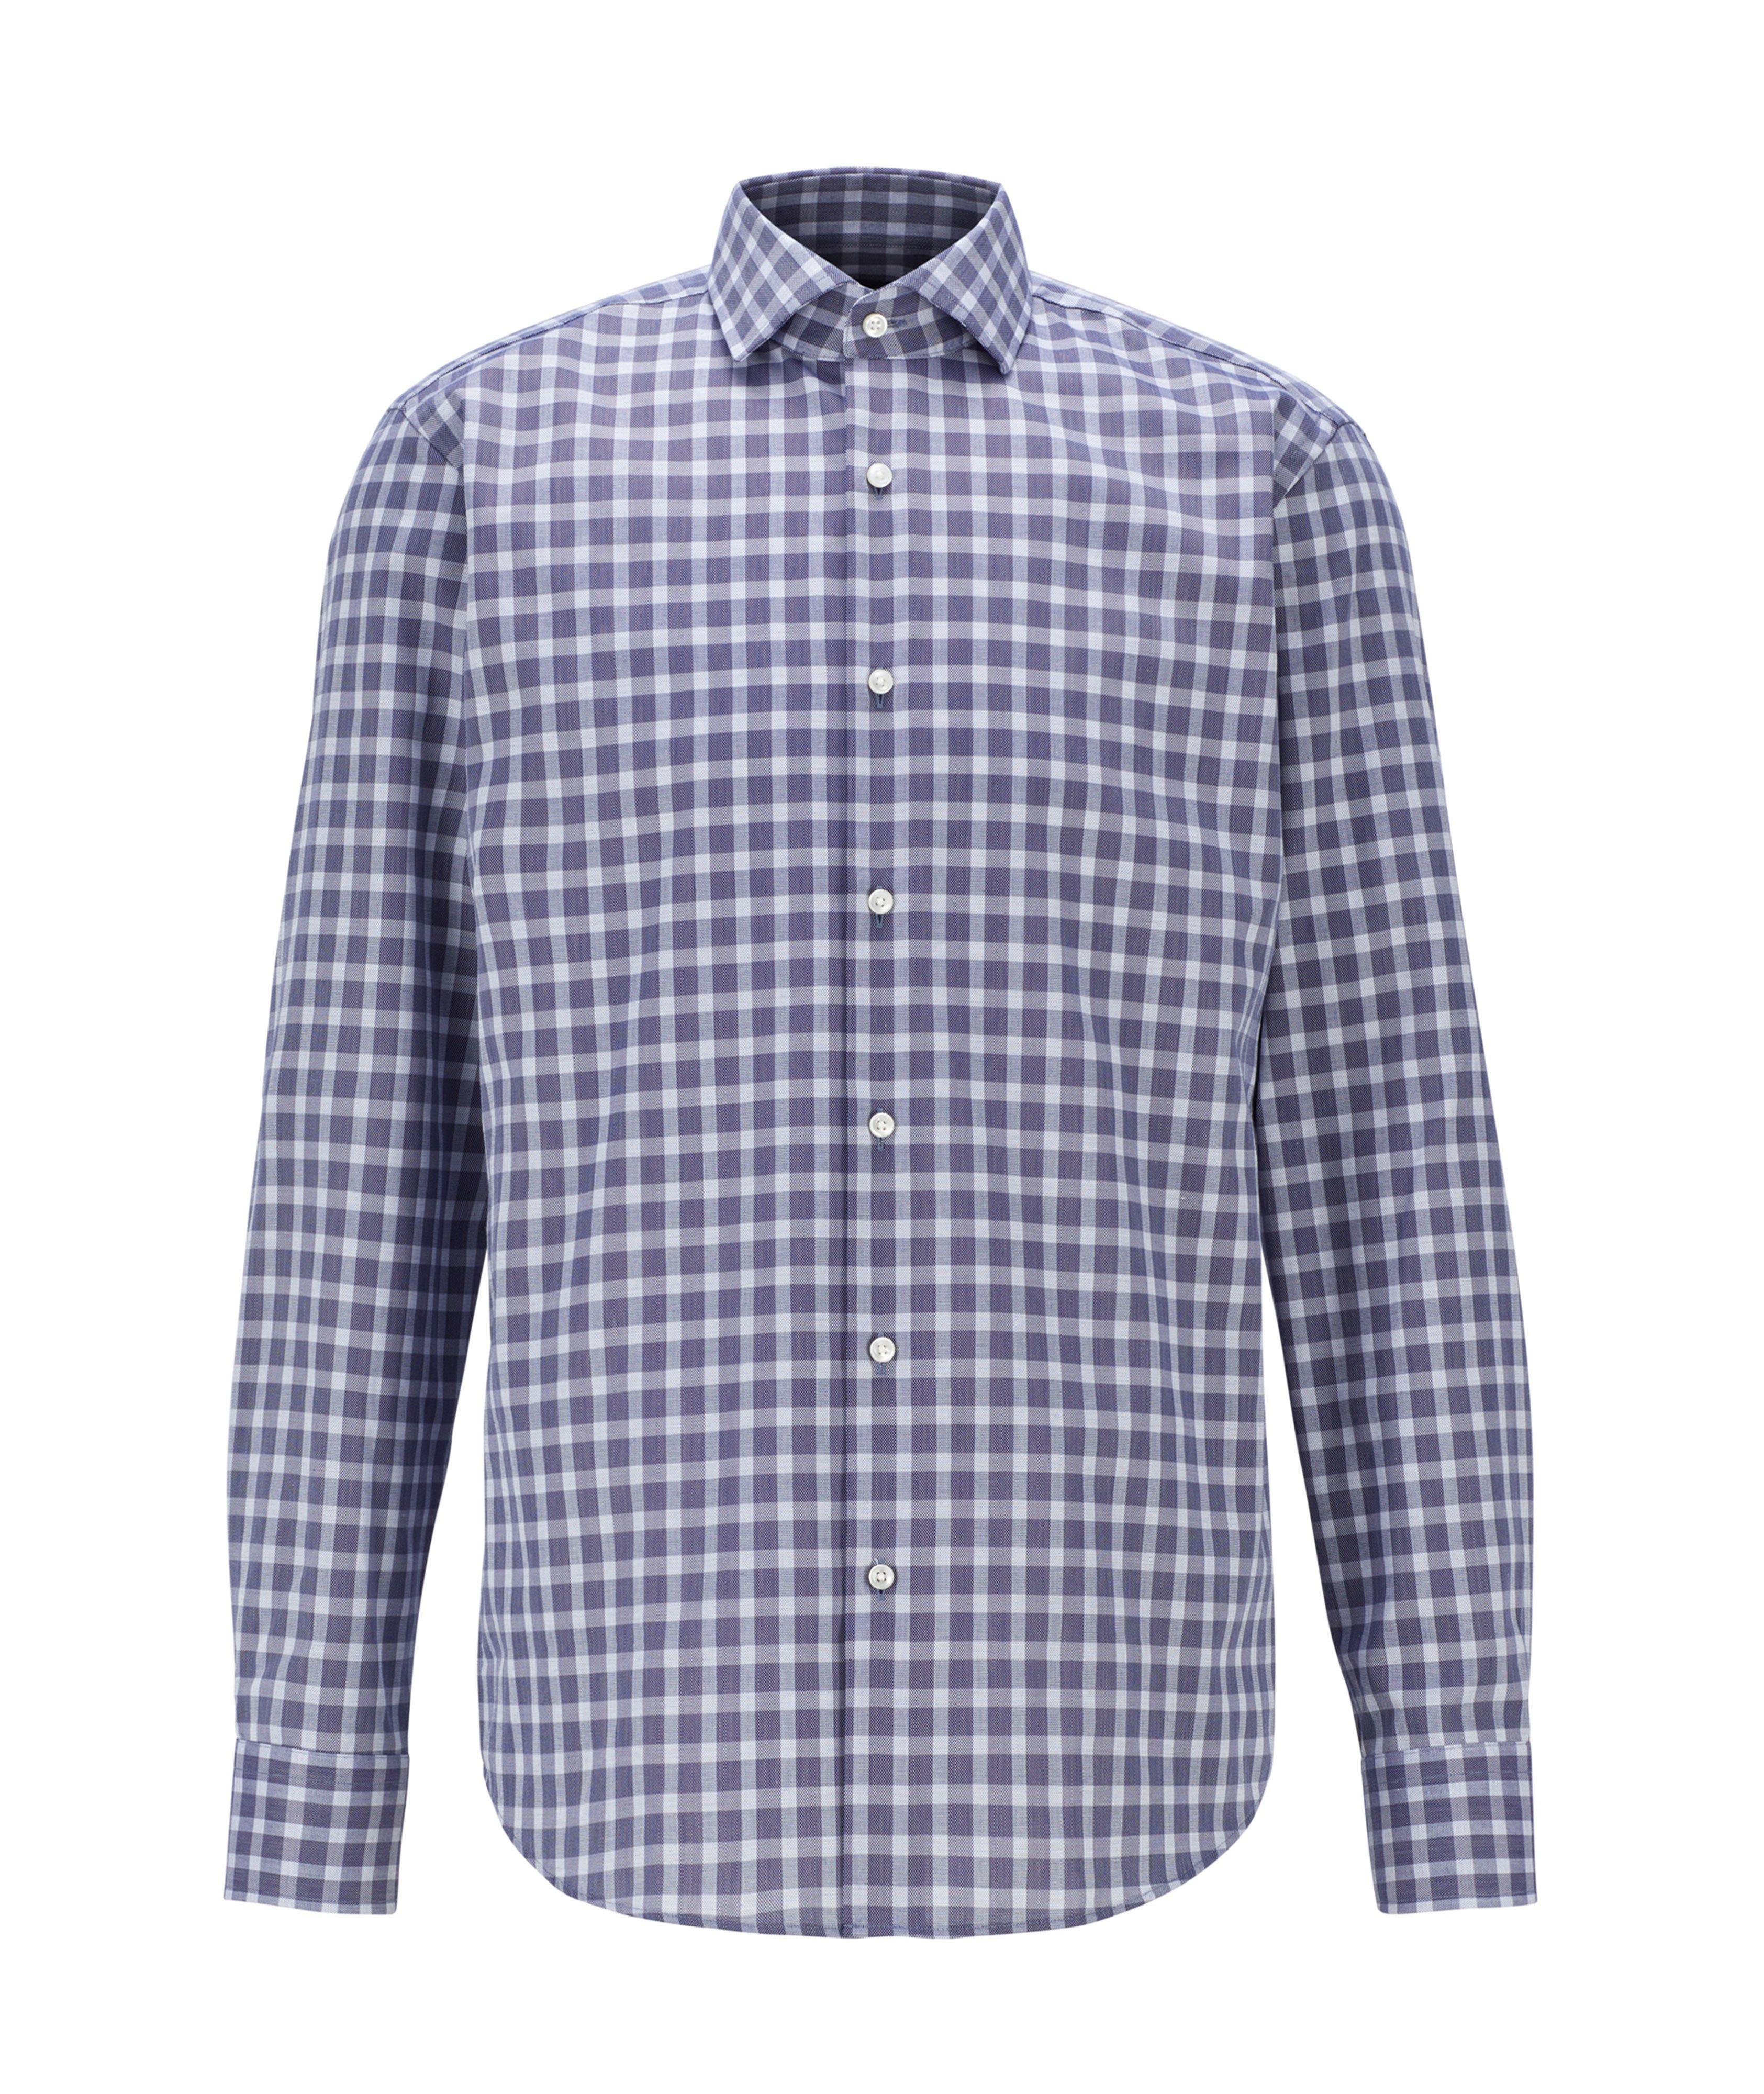 Contemporary-Fit Gingham Dress Shirt image 0